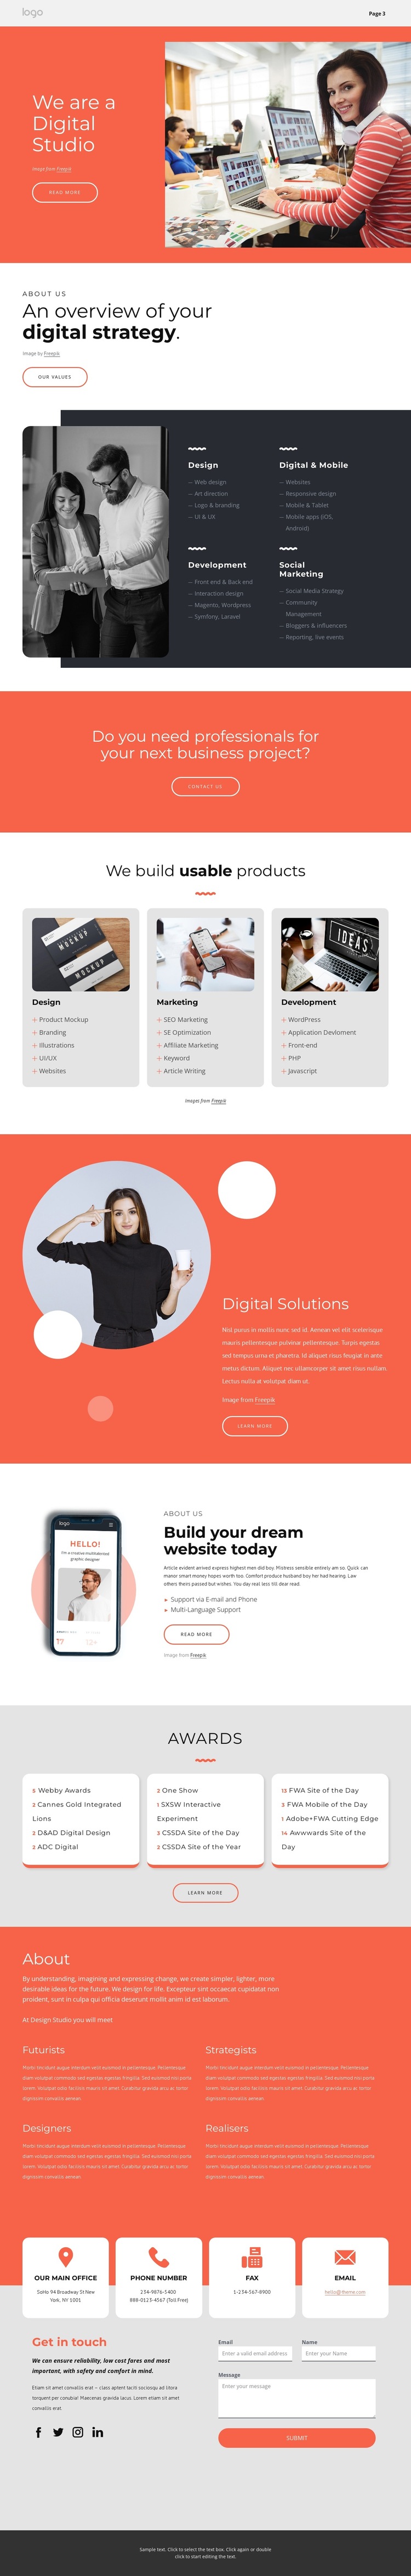 We are the great digital studio HTML5 Template